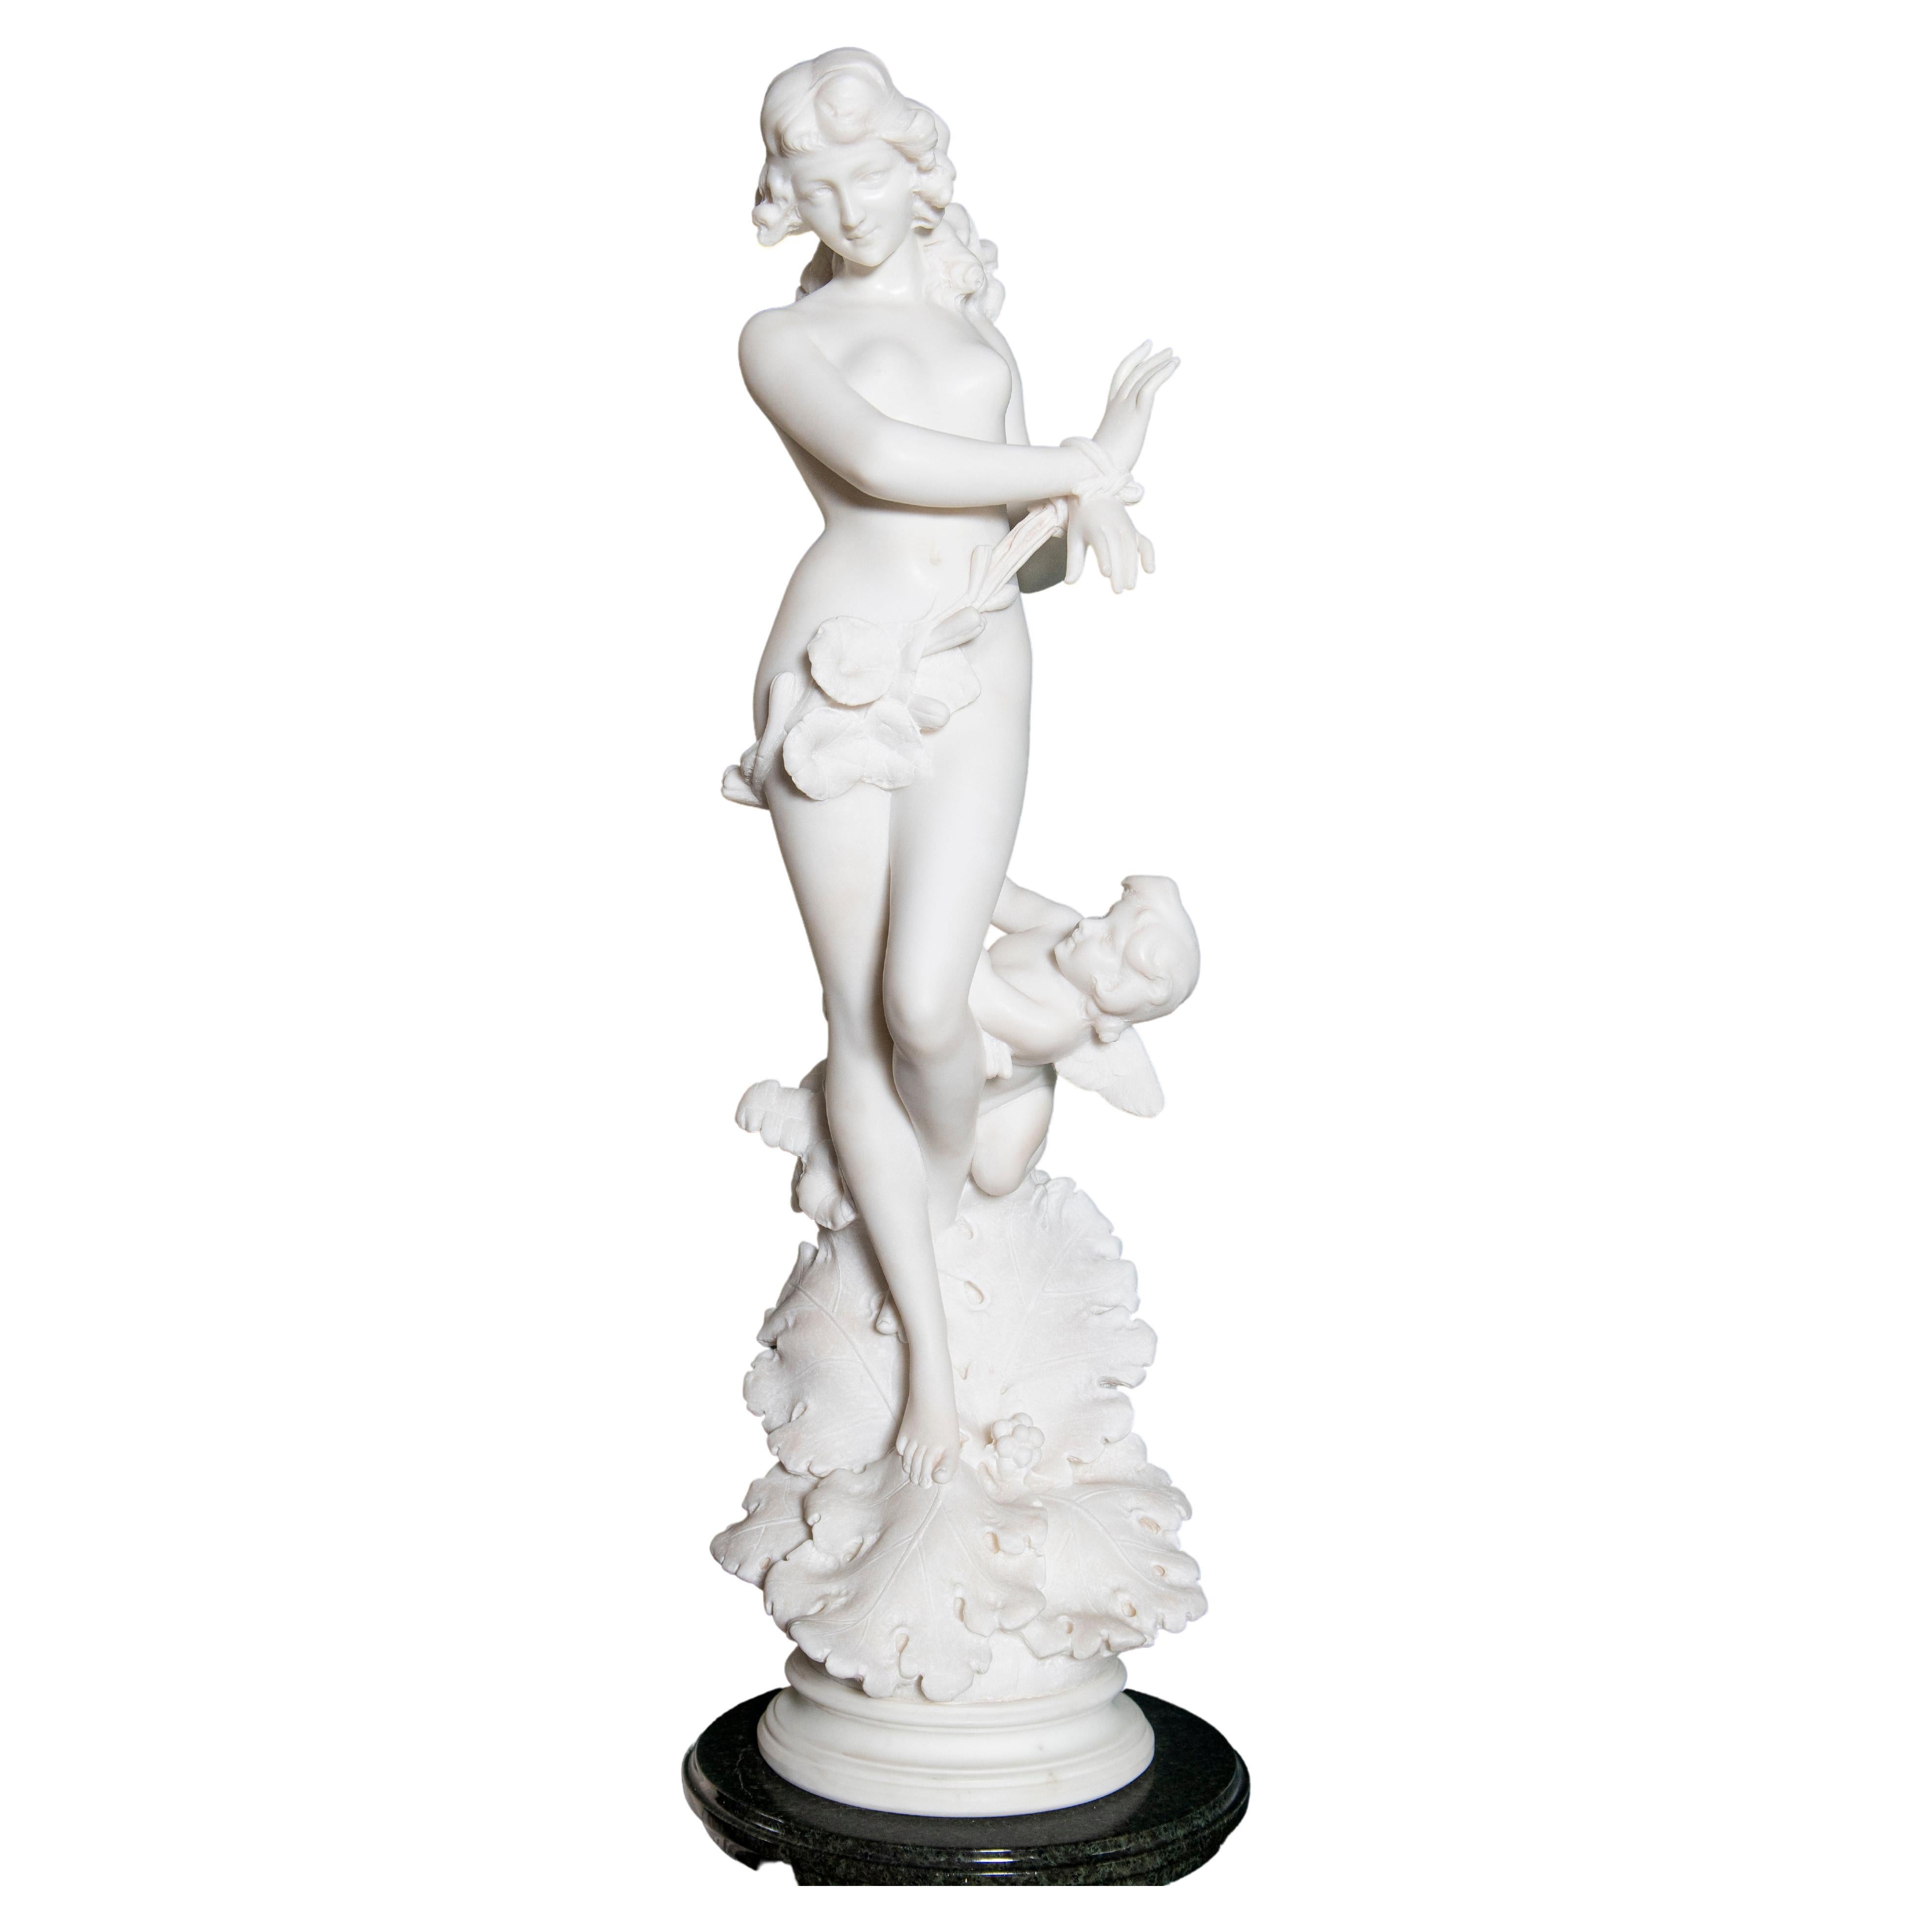 Carrara Marble Sculpture Signed A. Batacchi, Italy, Florence, Late 19th Century For Sale